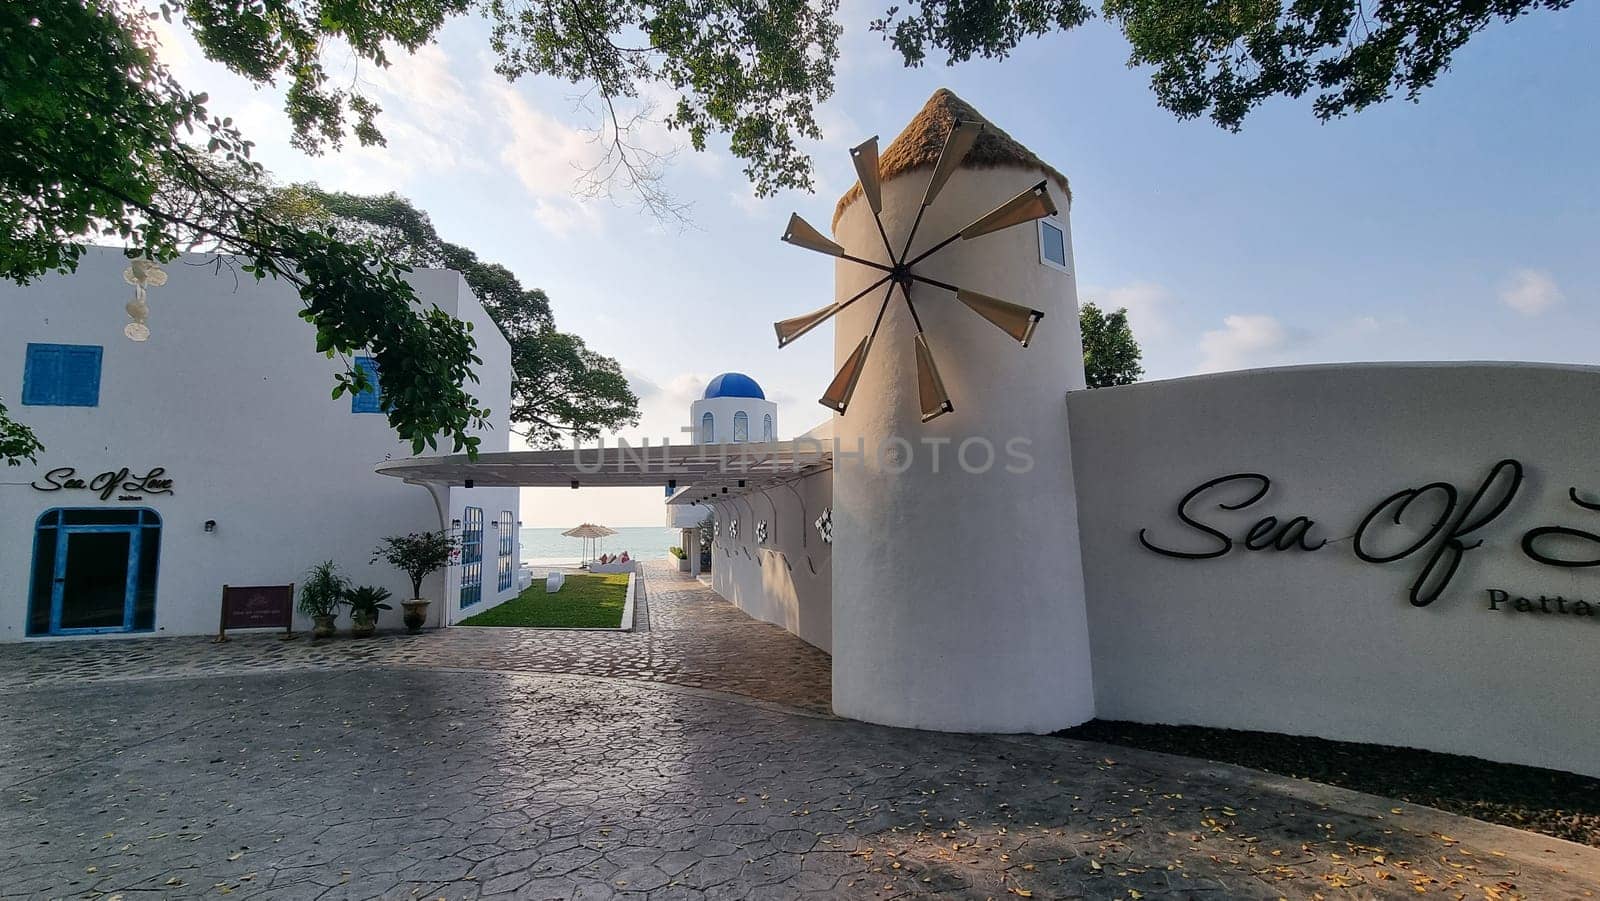 A majestic white building standing tall, adorned with a sign that reads Sea Off, inviting visitors to experience the wonders of the oceanfront by fokkebok